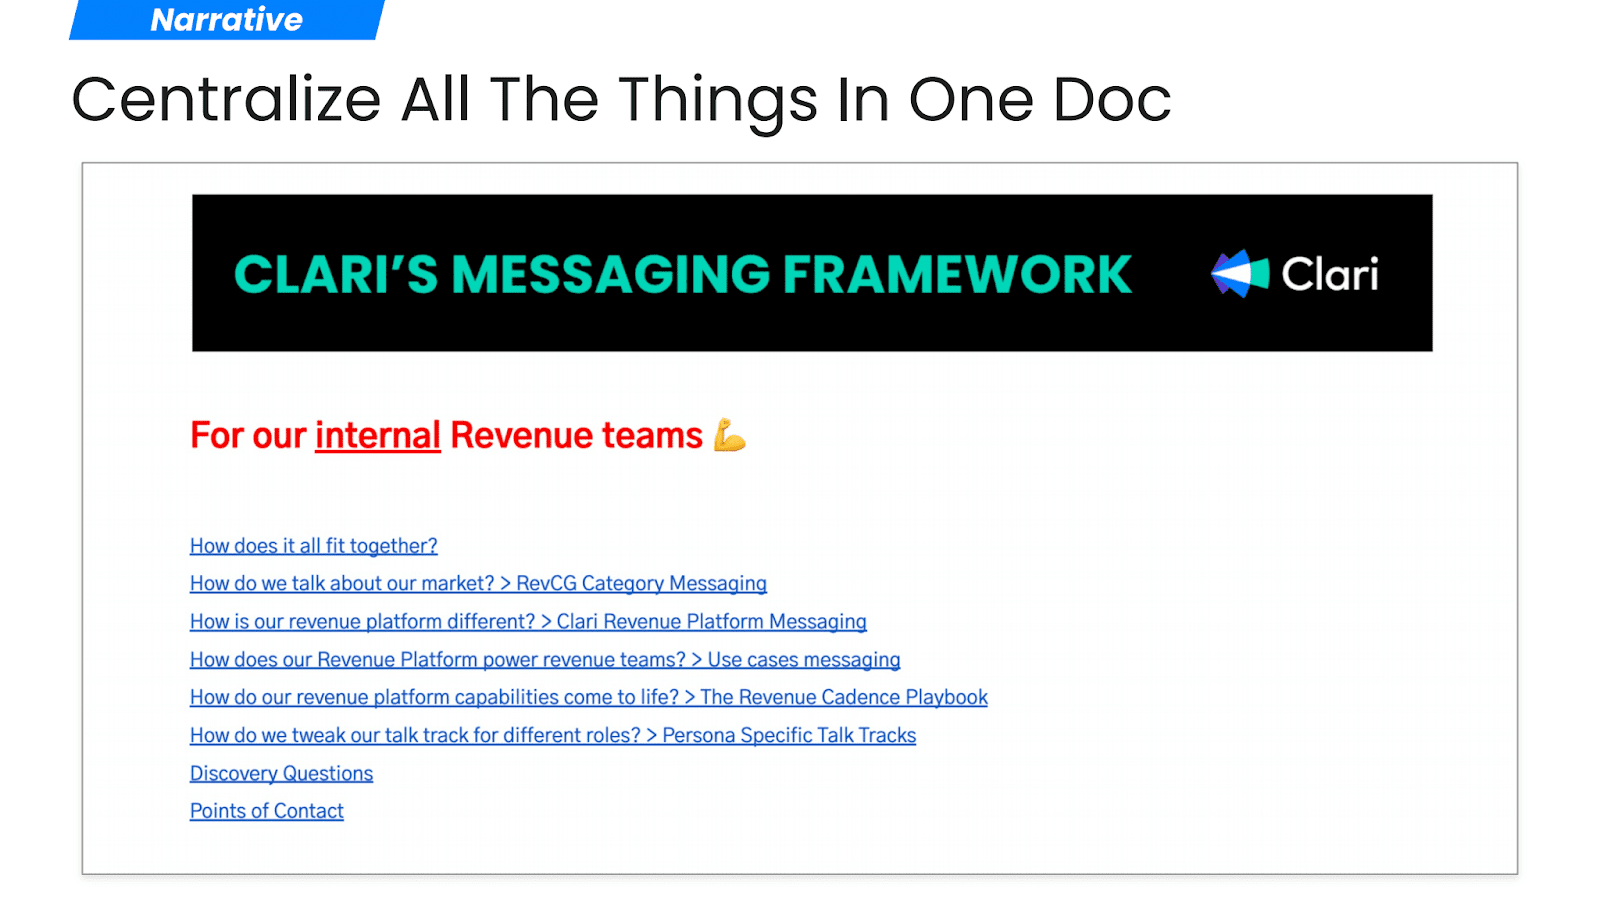 Centralize all the things in one doc